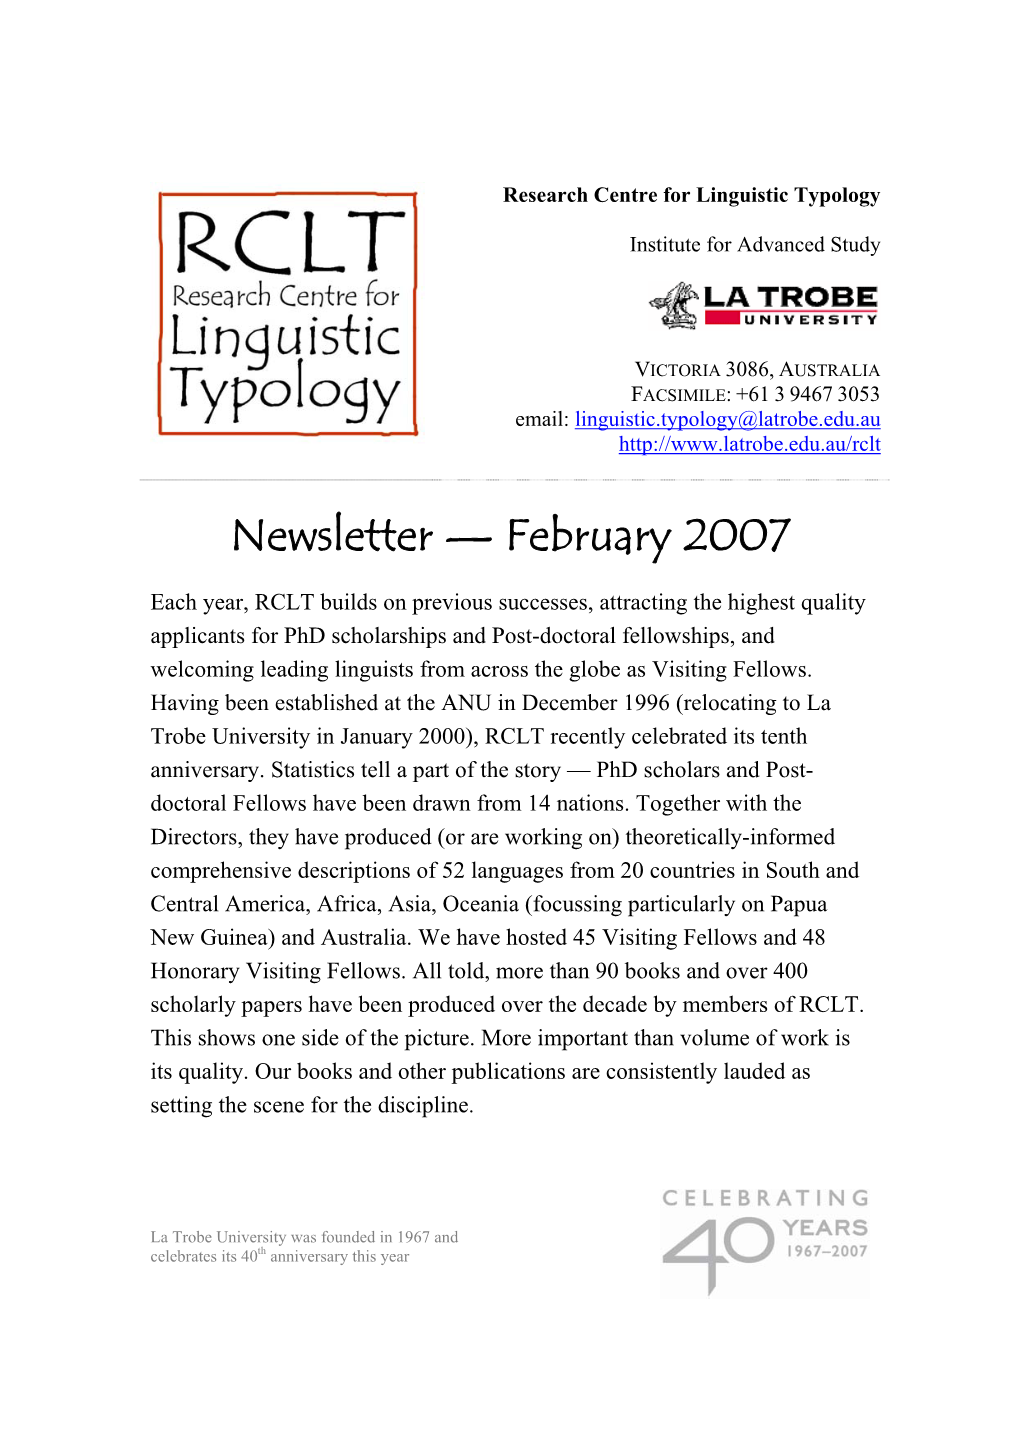 Annual Newsletter of the Research Centre for Linguistic Typology 2007